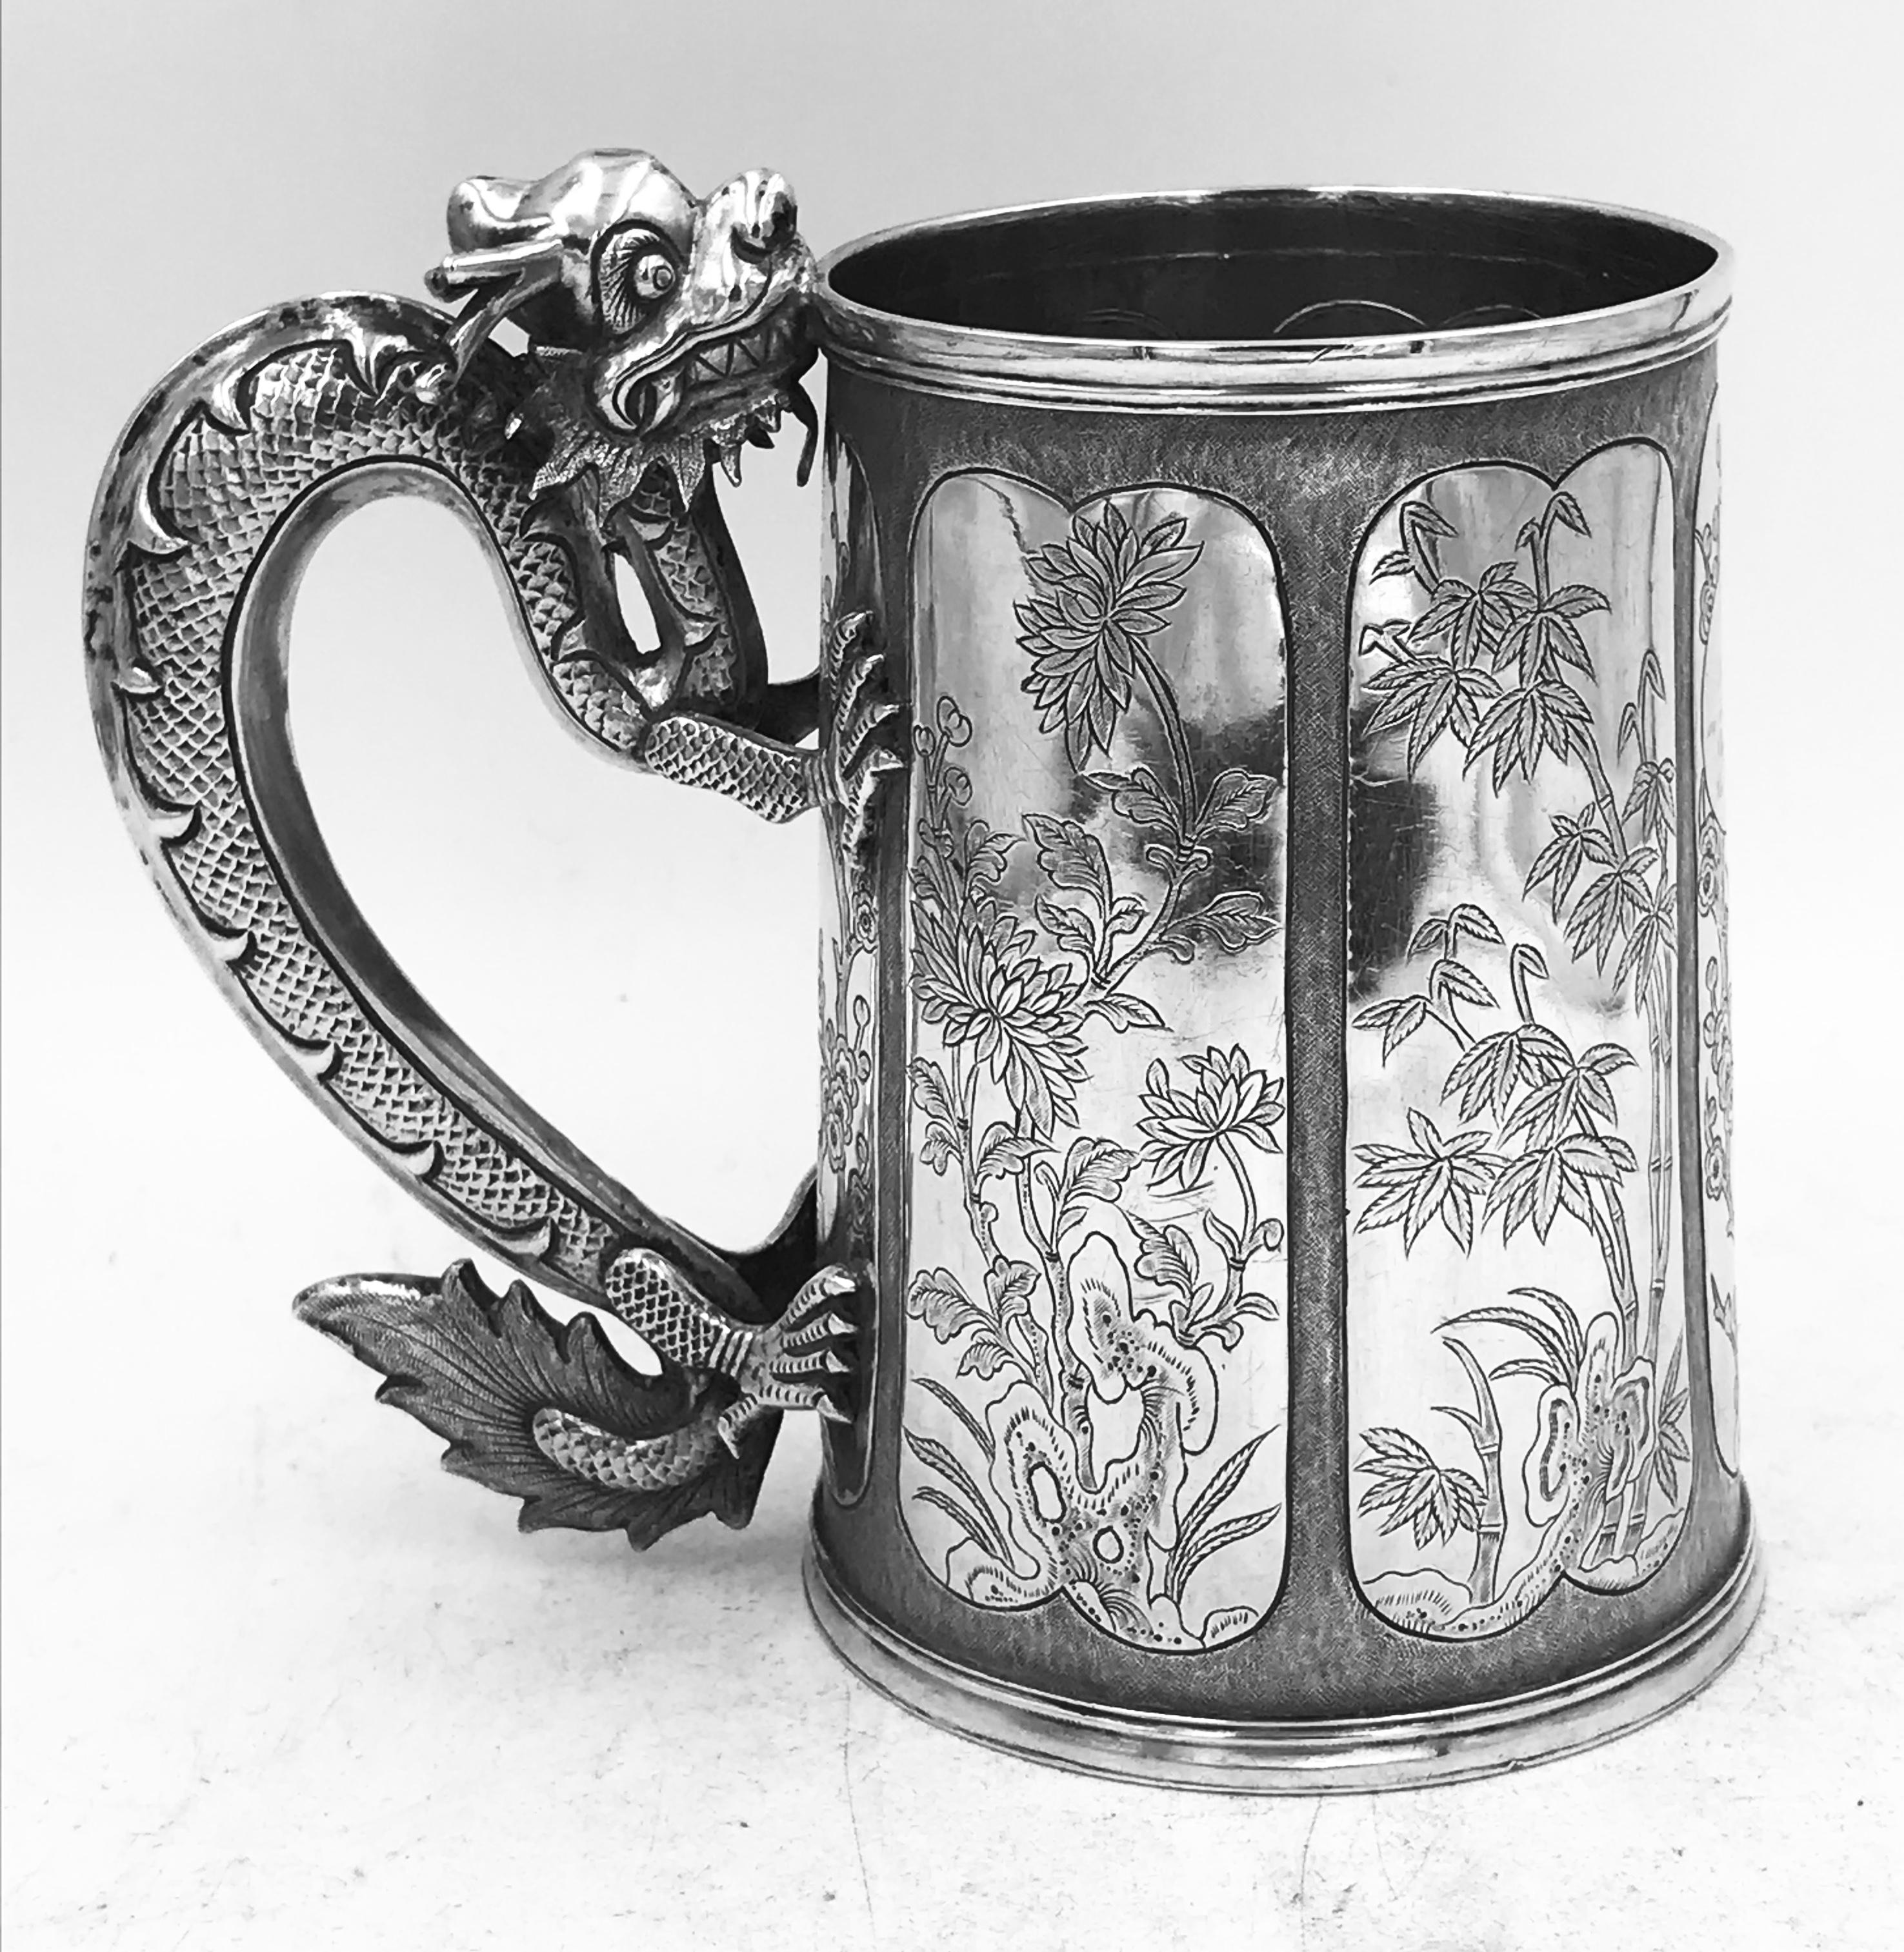 A Chinese export silver mug with flowers and foliage engraved within decorative panels; and a dragon handle. Marked with LC, for Leeching, 利升 (LiSheng), an important retailer in Canton who began in the 1840s and expanded to sell in Hong Kong in